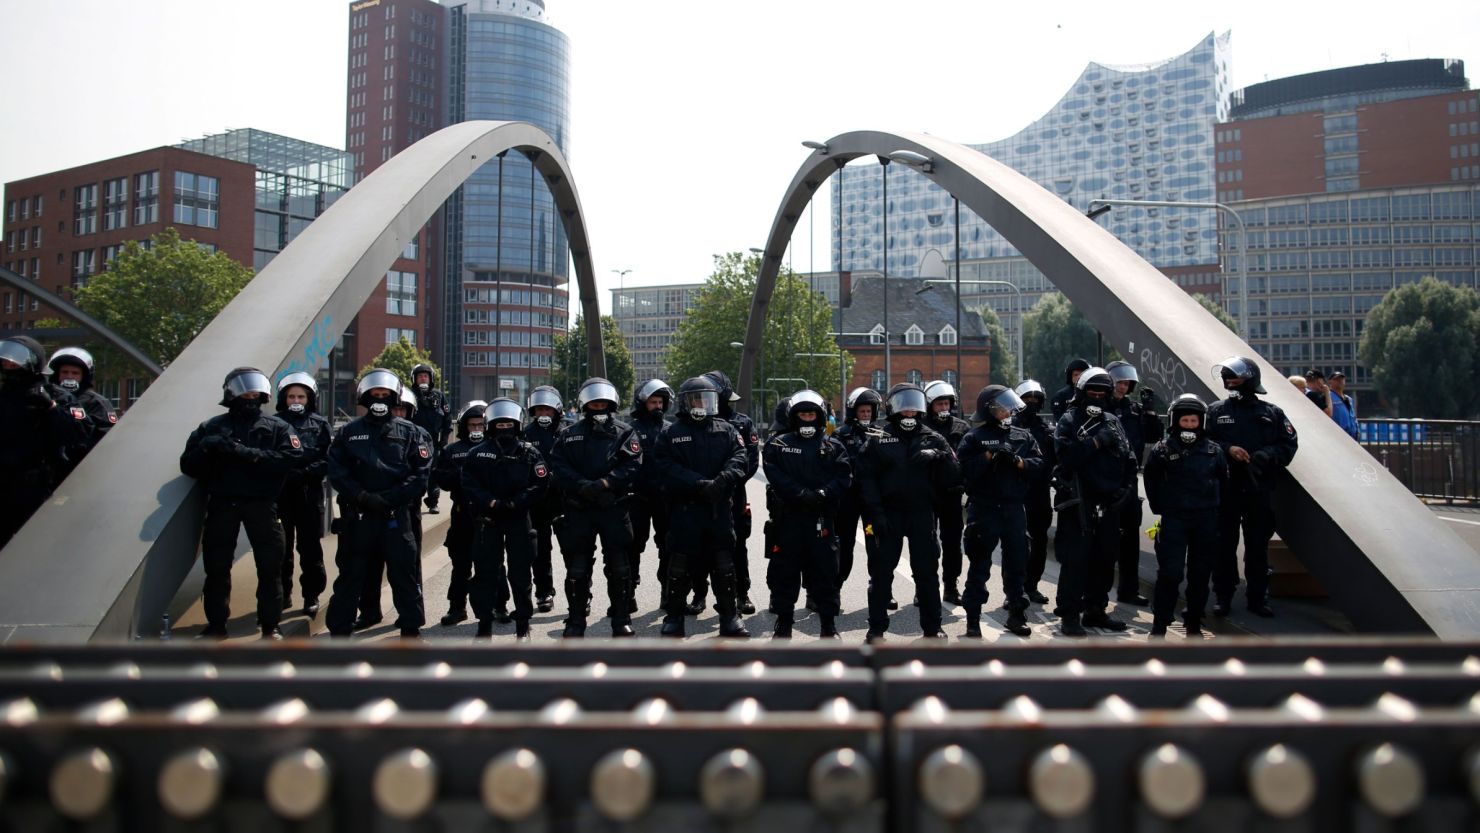 Policemen secure the area around the Elbphilharmonie concert hall on July 7.